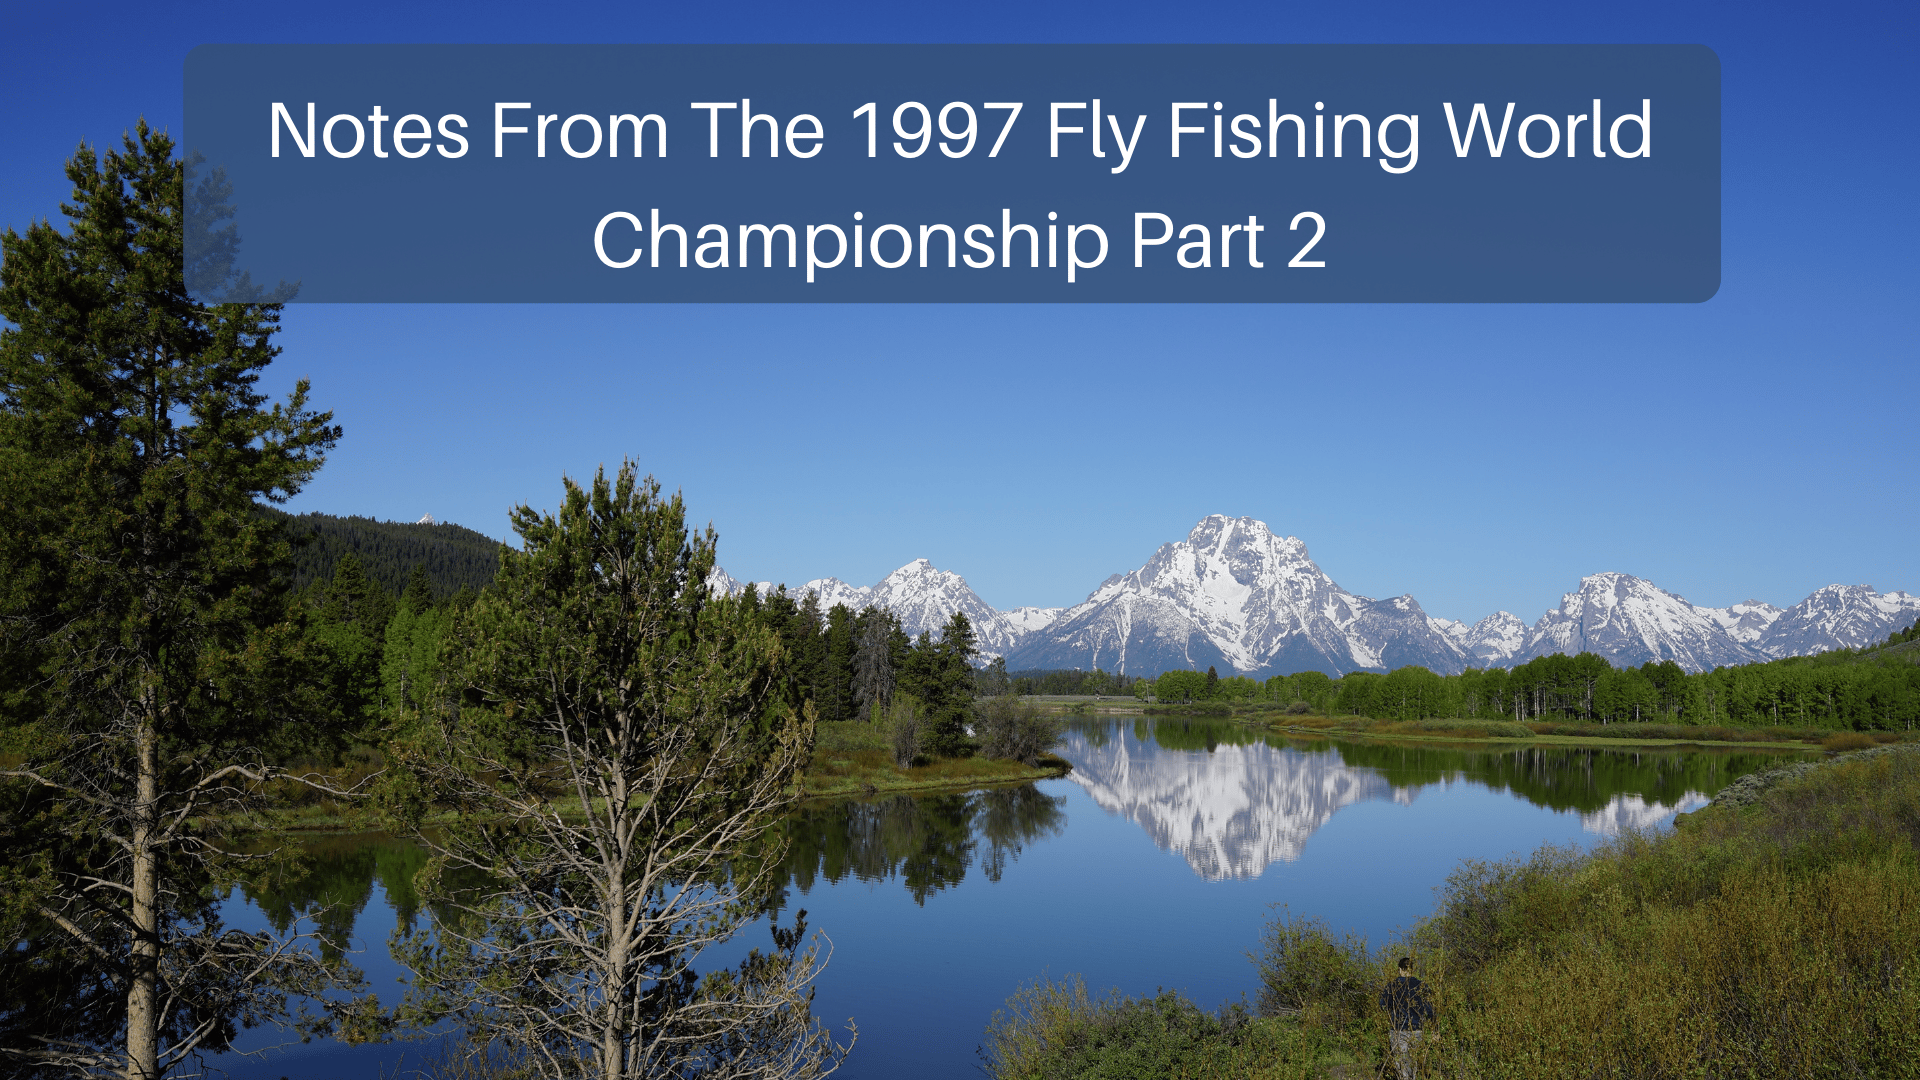 Notes from a 1997 World Fly Fishing Championship: Part 2